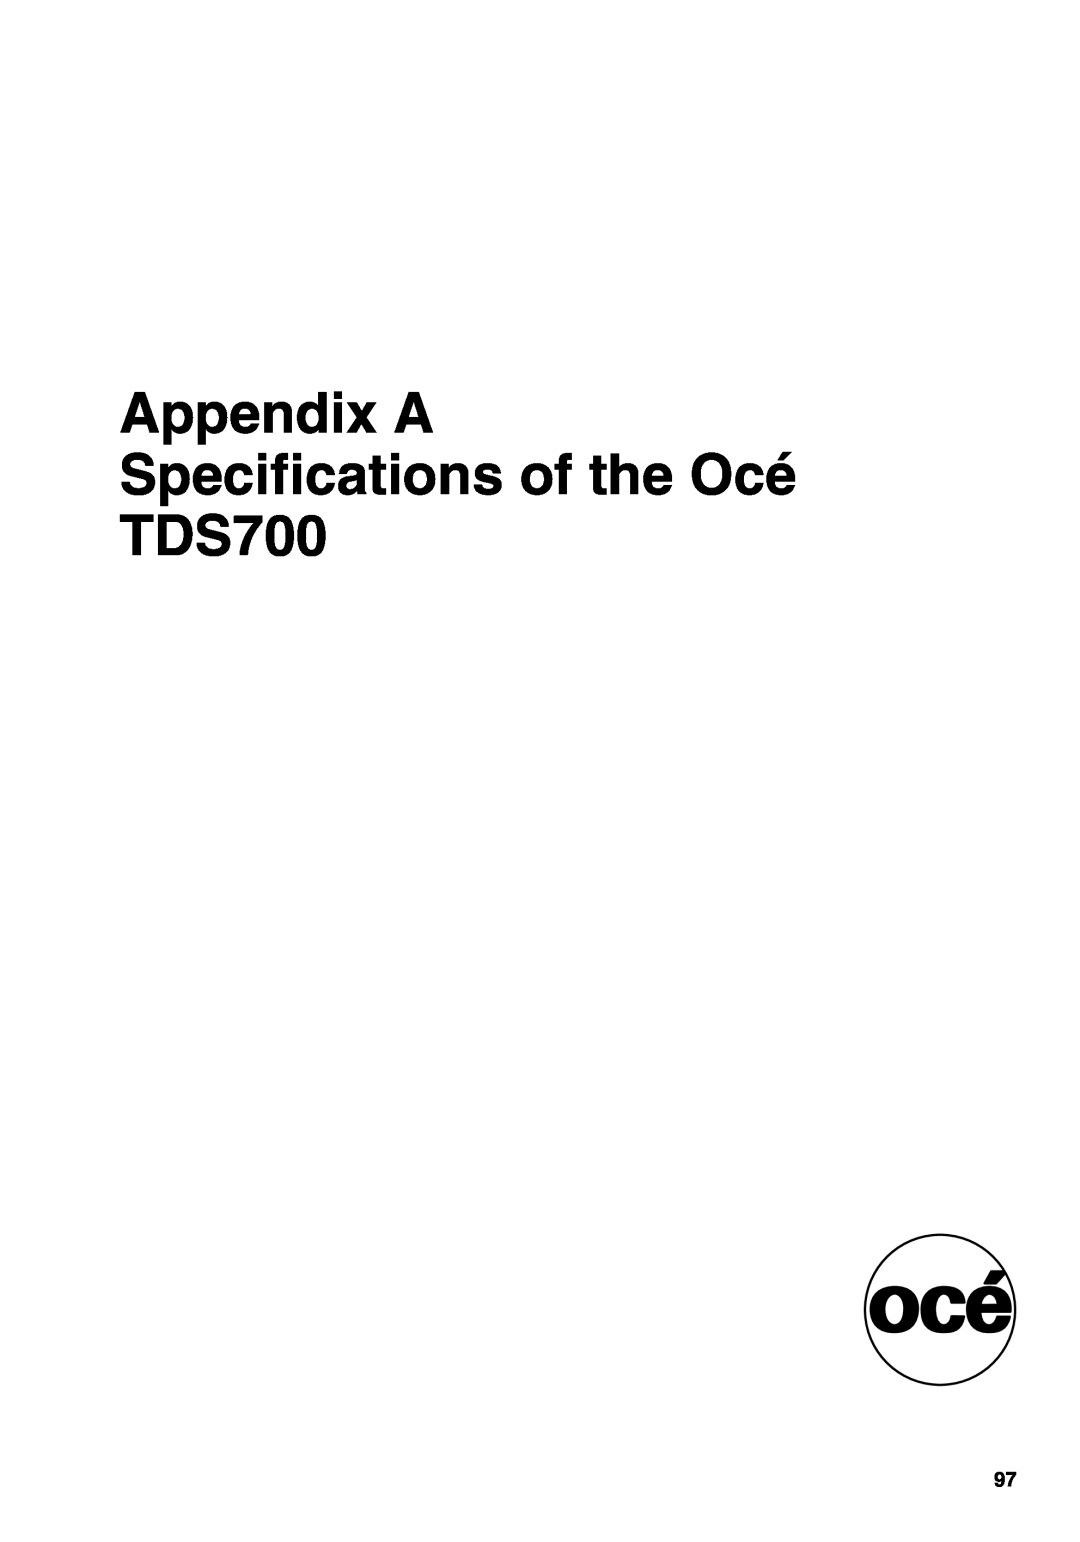 Oce North America user manual Appendix A Specifications of the Océ TDS700 